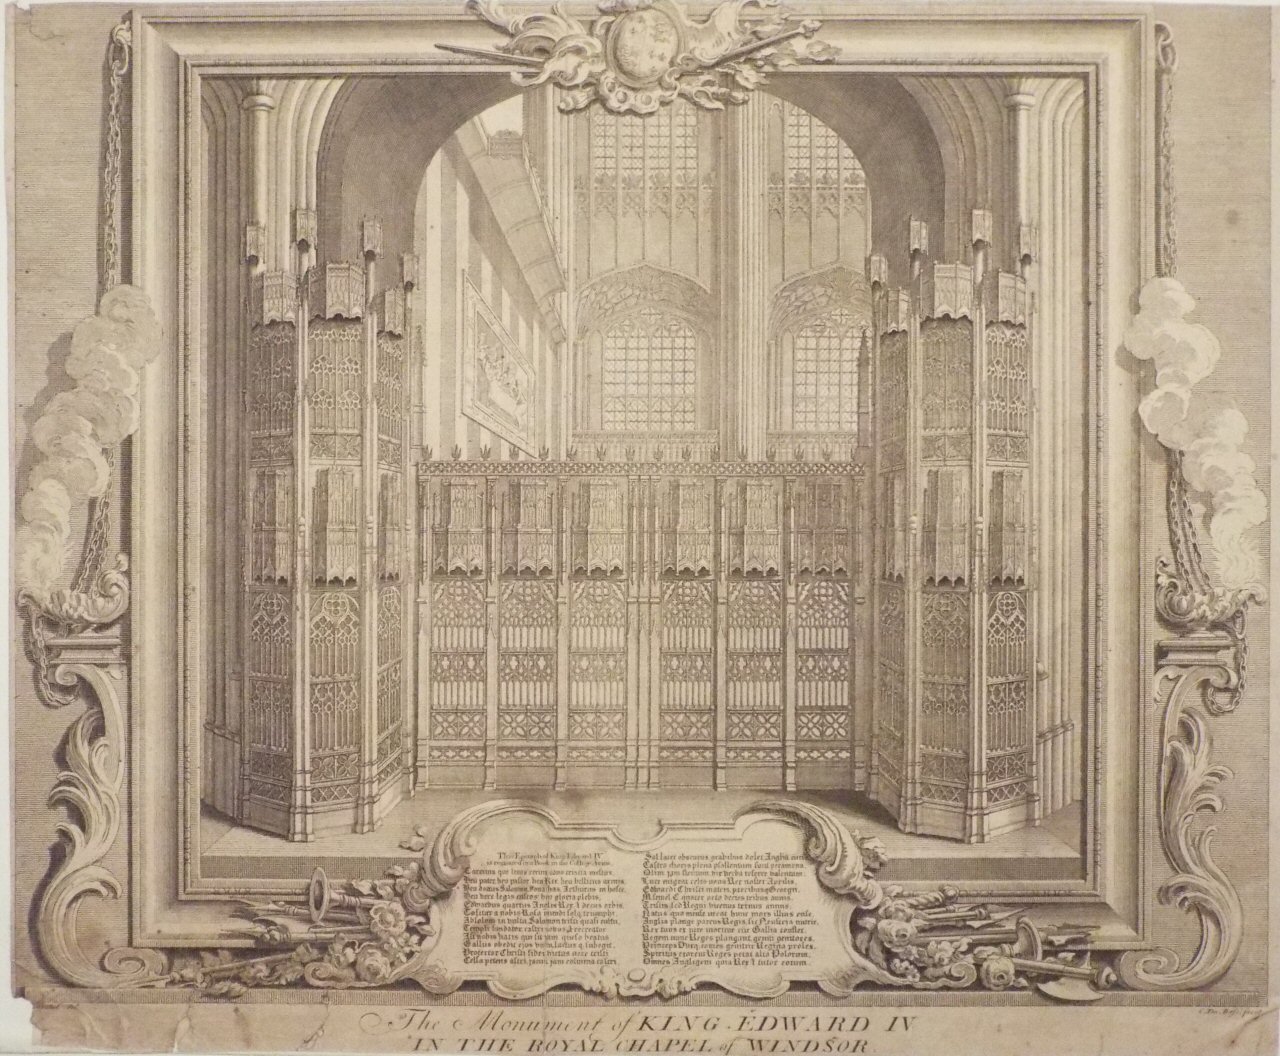 Print - The Monument of King Edward IV in the Royal Chapel of Windsor. - Du